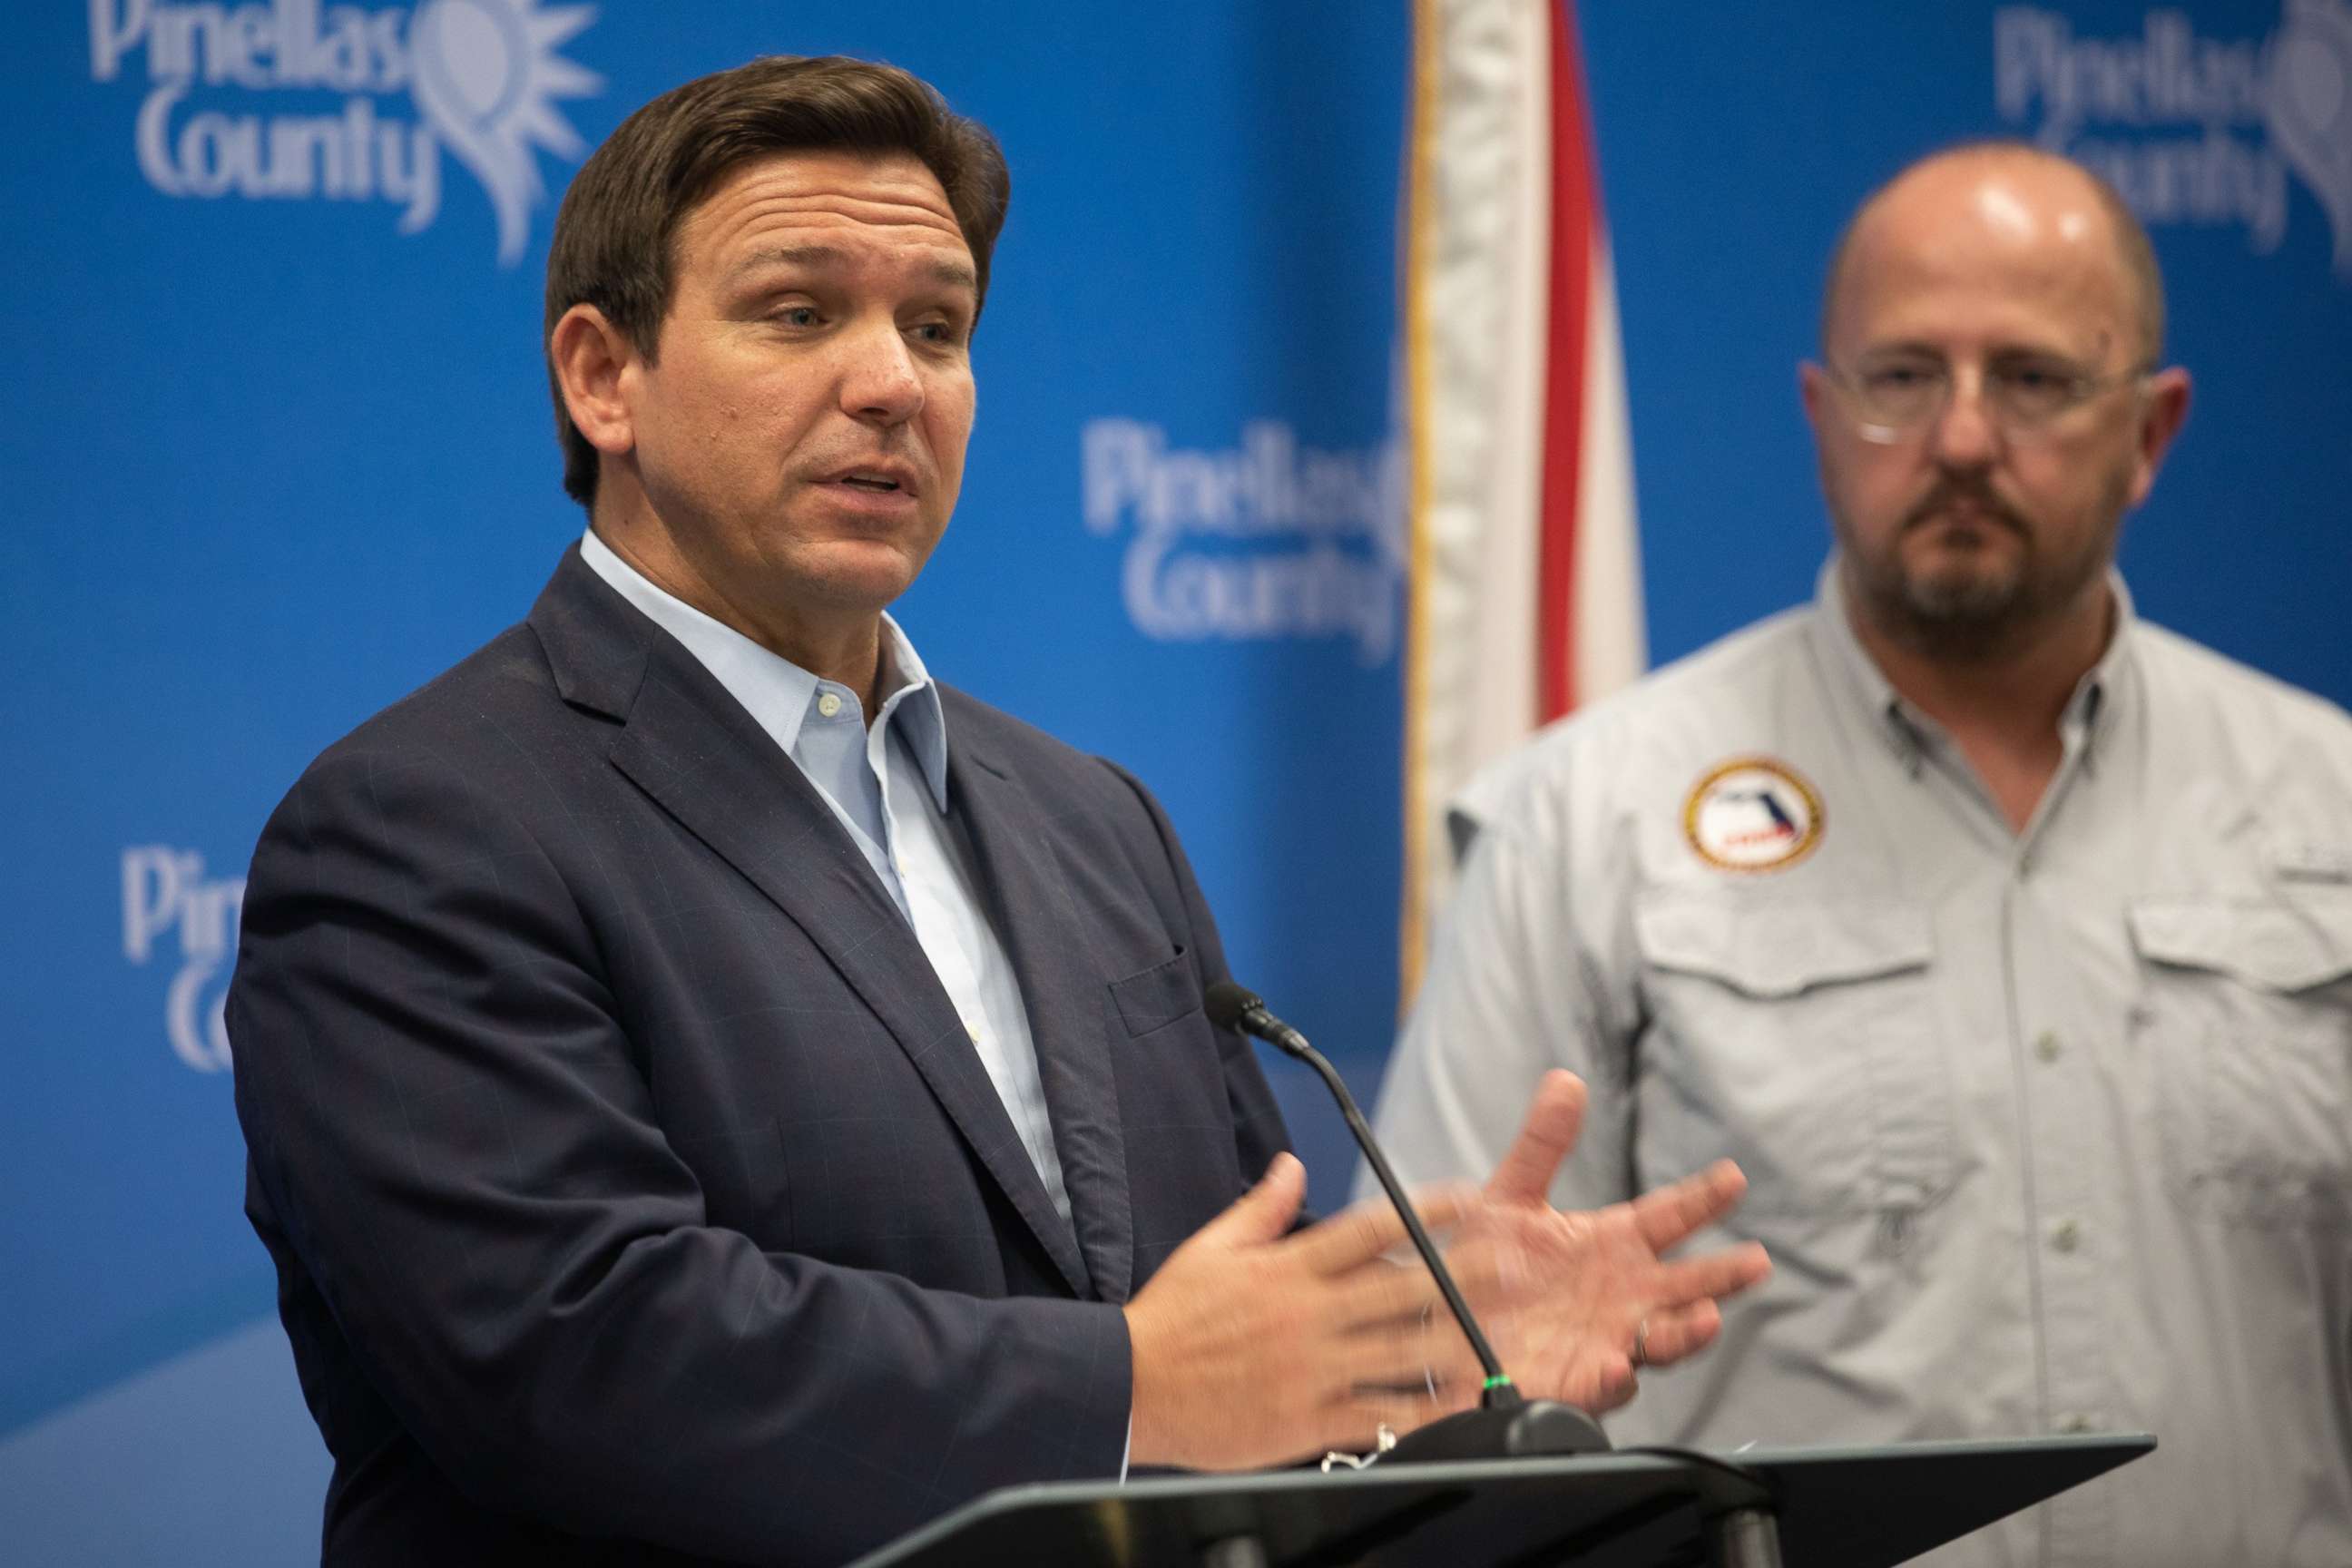 PHOTO: Gov. Ron DeSantis held a press conference as Florida awaits Hurricane Ian's arrival, at the Pinellas County Emergency Operations Center on Sept. 26, 2022, in Largo, Fla.